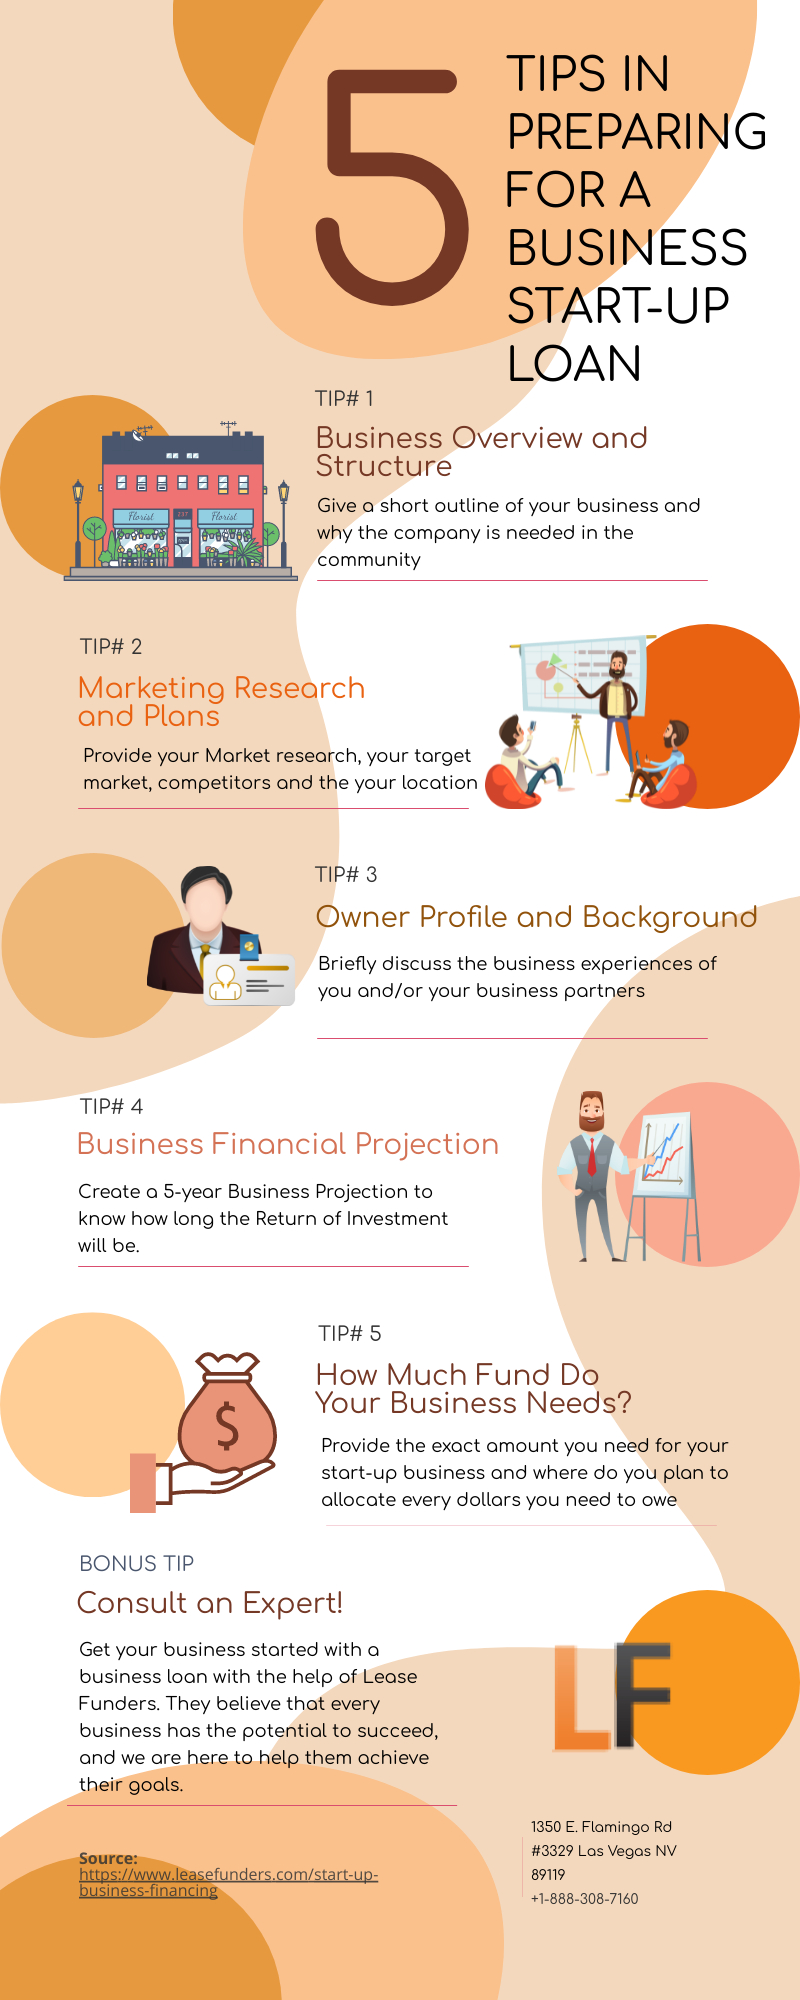 Quick Tips For Preparing A Business Start-Up Loan